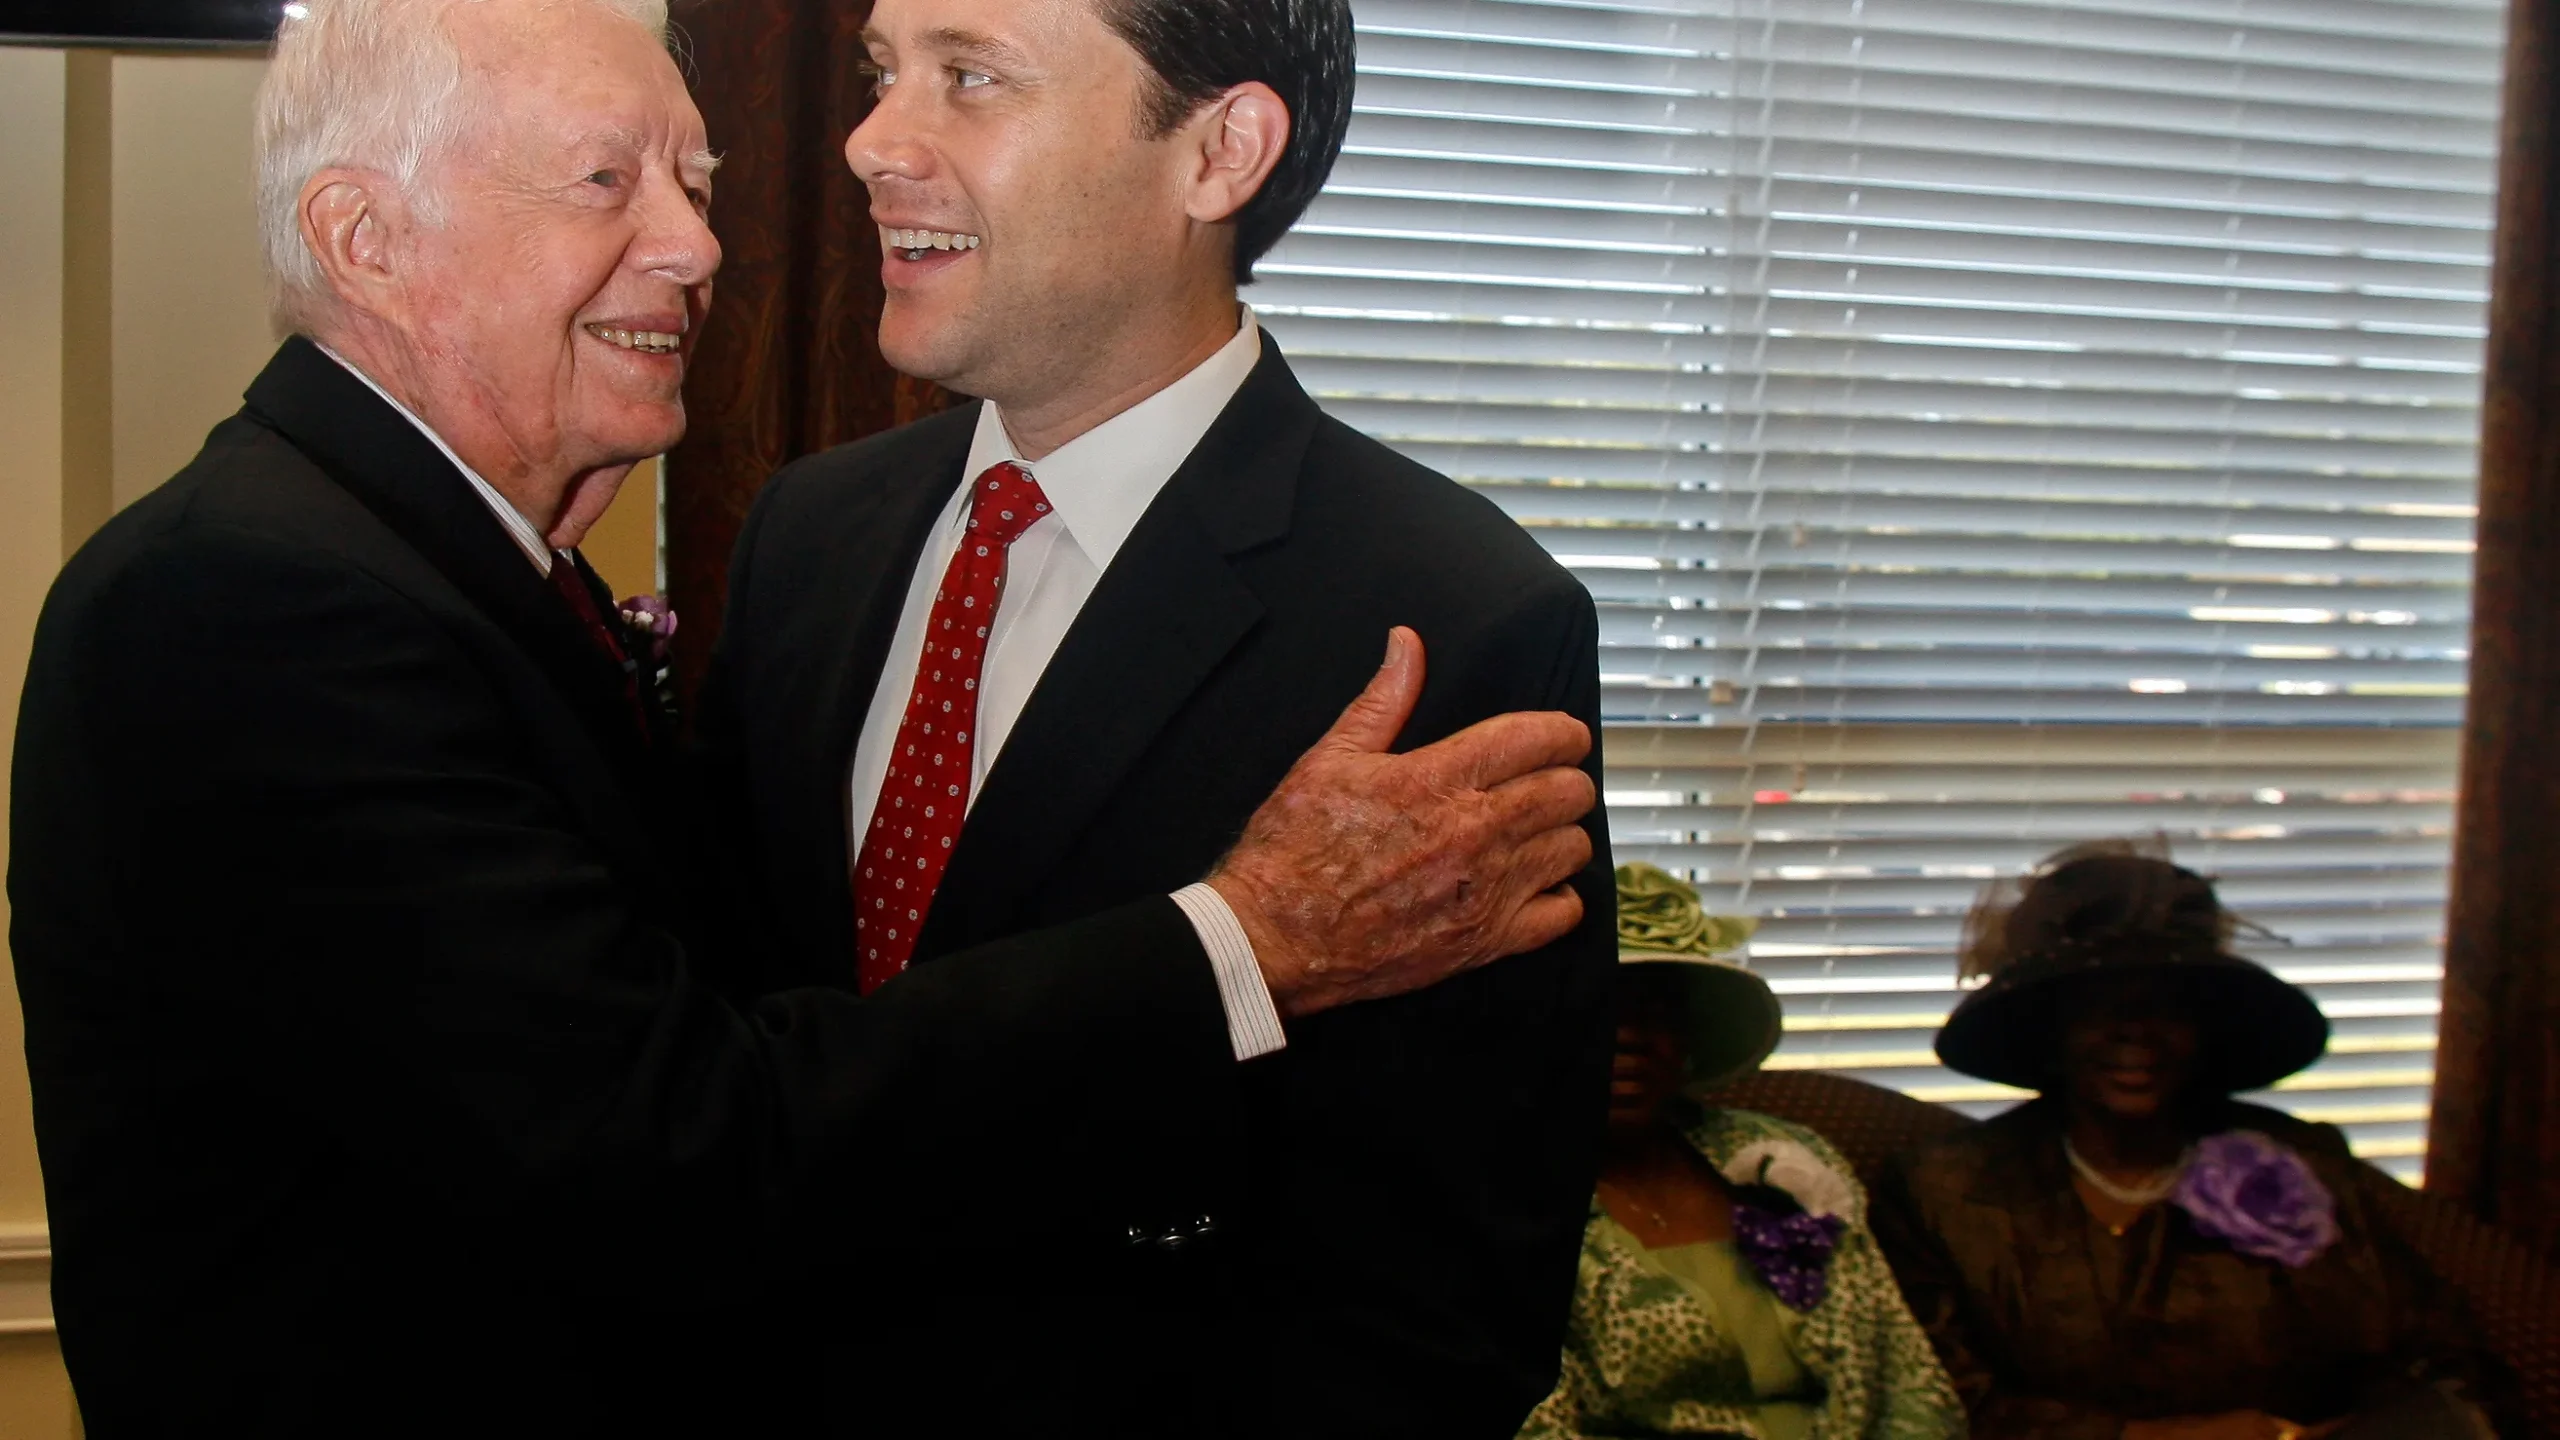 Jason Carter Reflects on Family Heritage and Political Aspirations